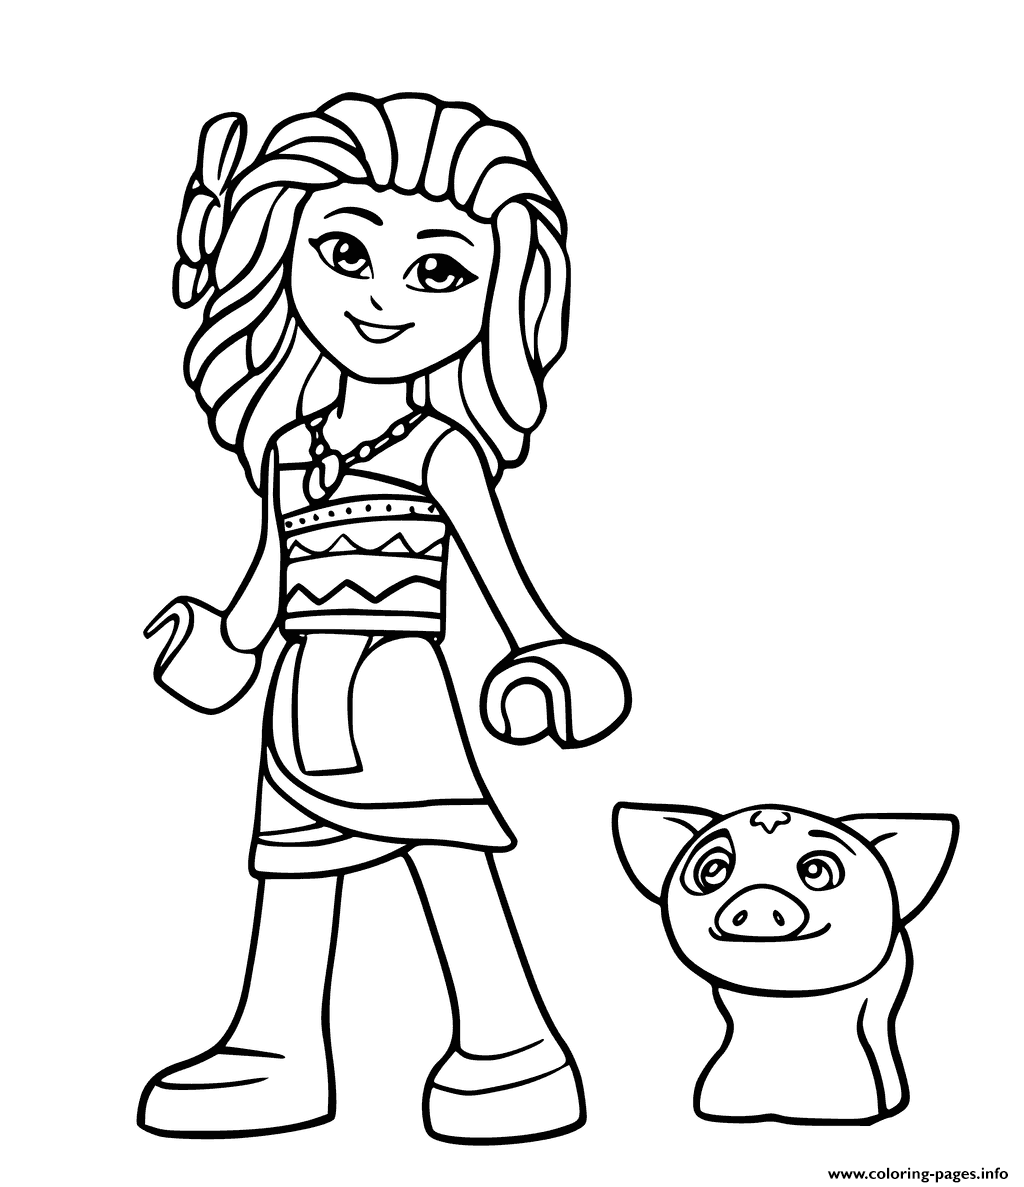 Lego Moana And Pig Pua From Disney Coloring Pages Printable